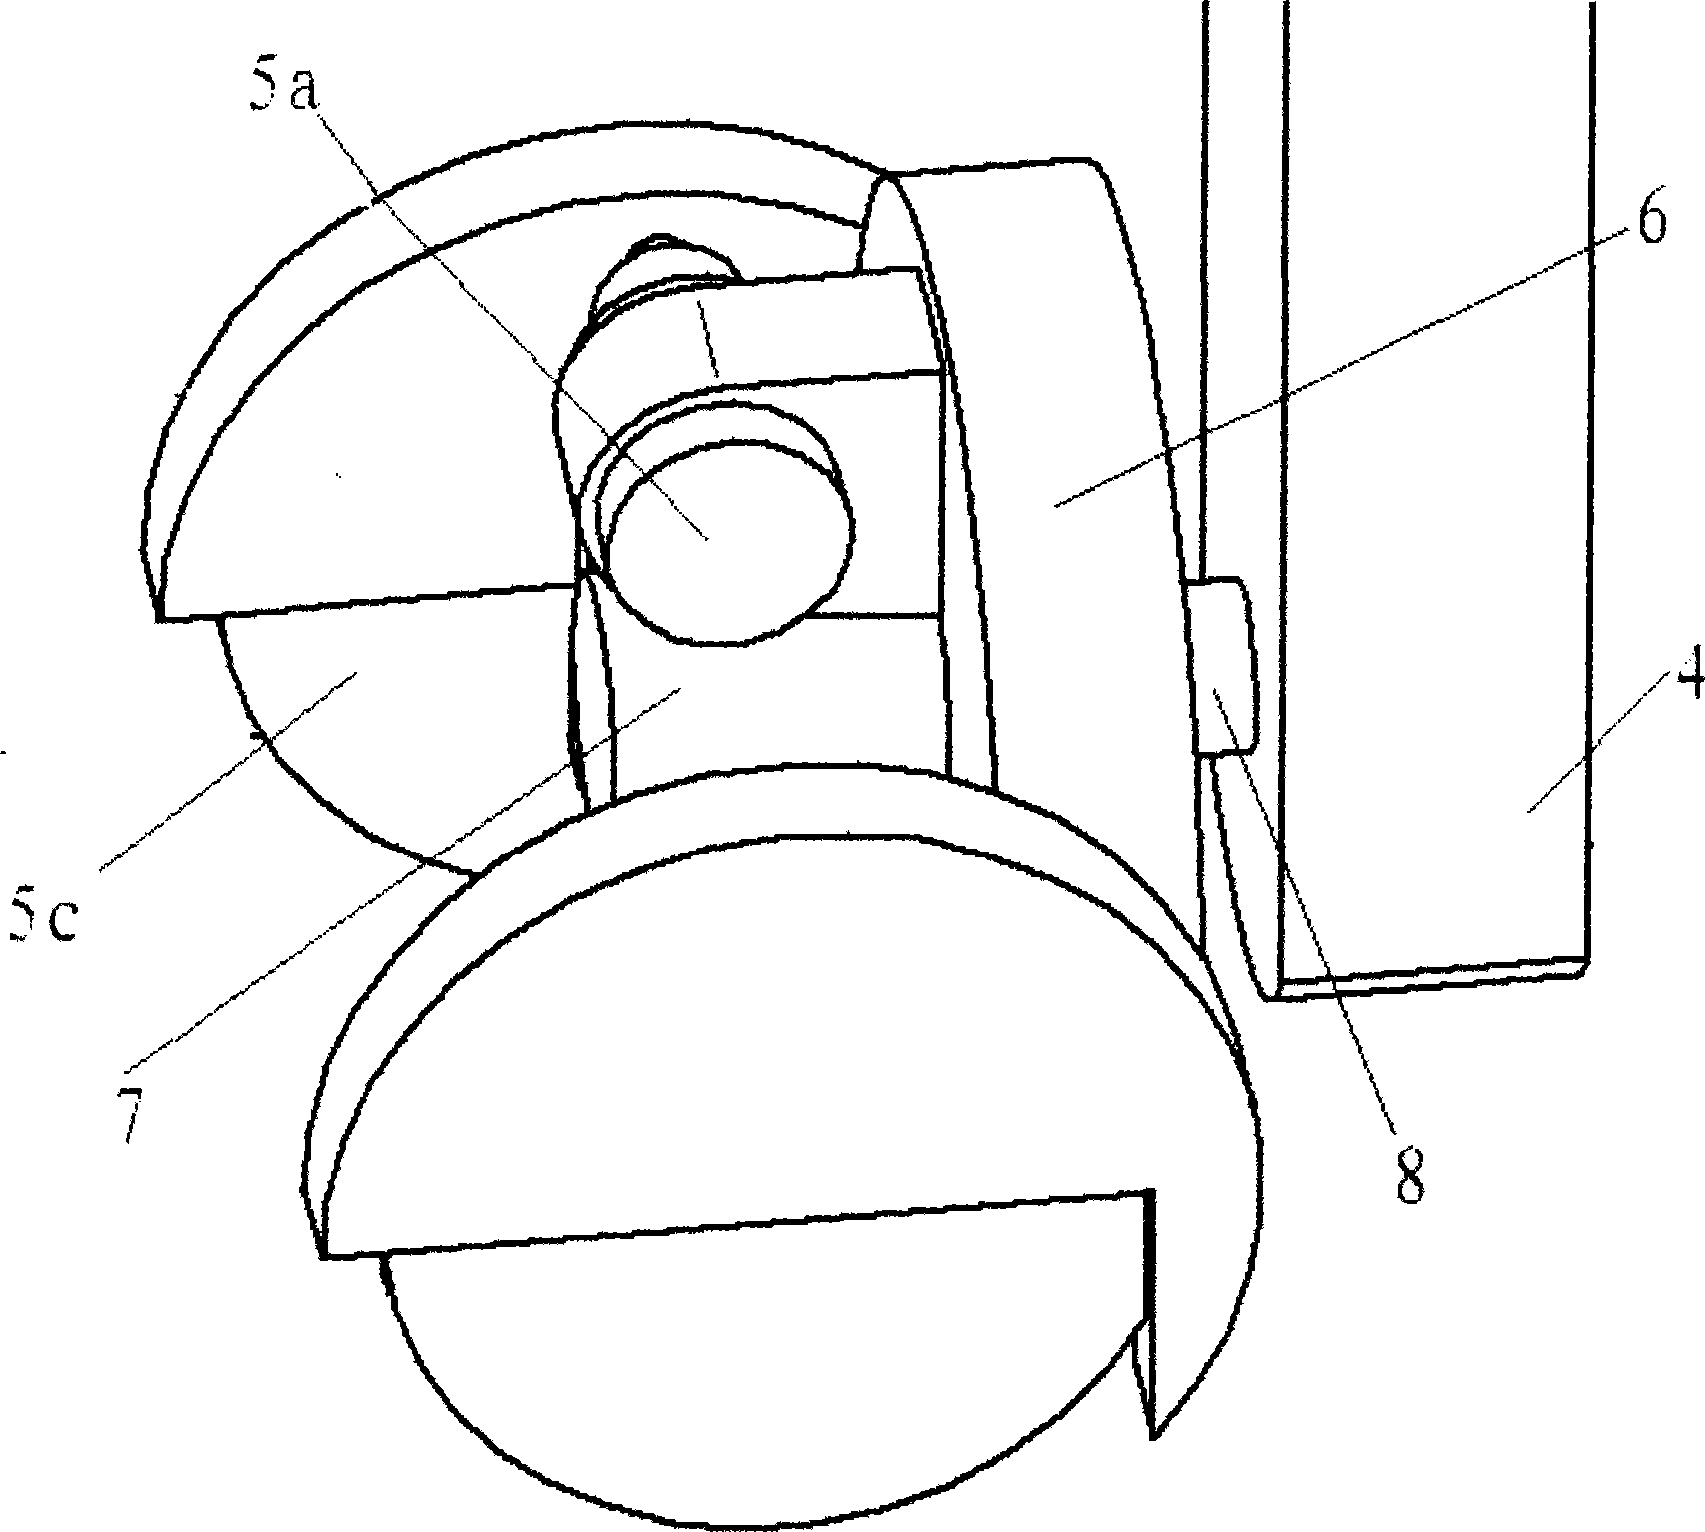 Computer numerical control special-shaped stone cutting machine